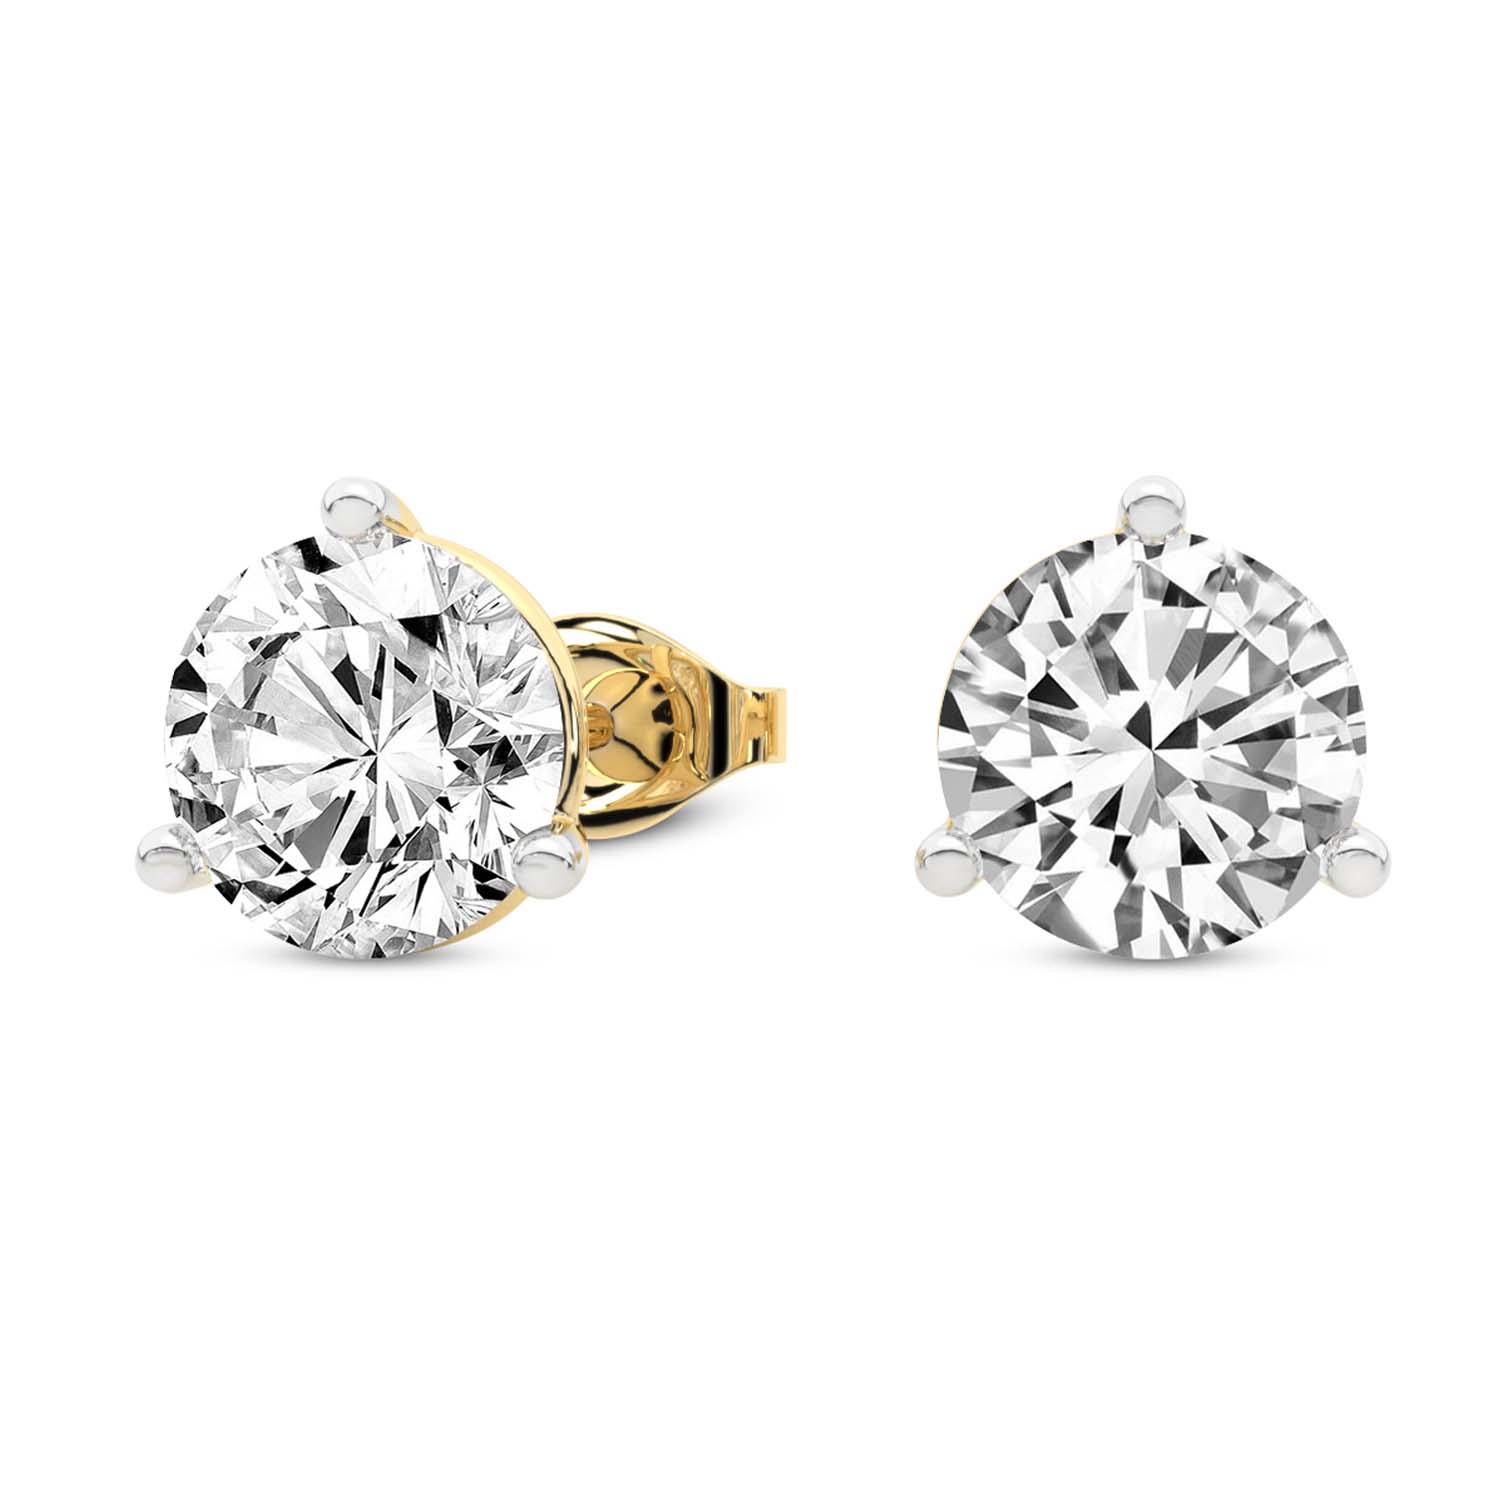 3 Prong Martini Round Lab Diamond Stud Earrings yellow gold earring, small right view